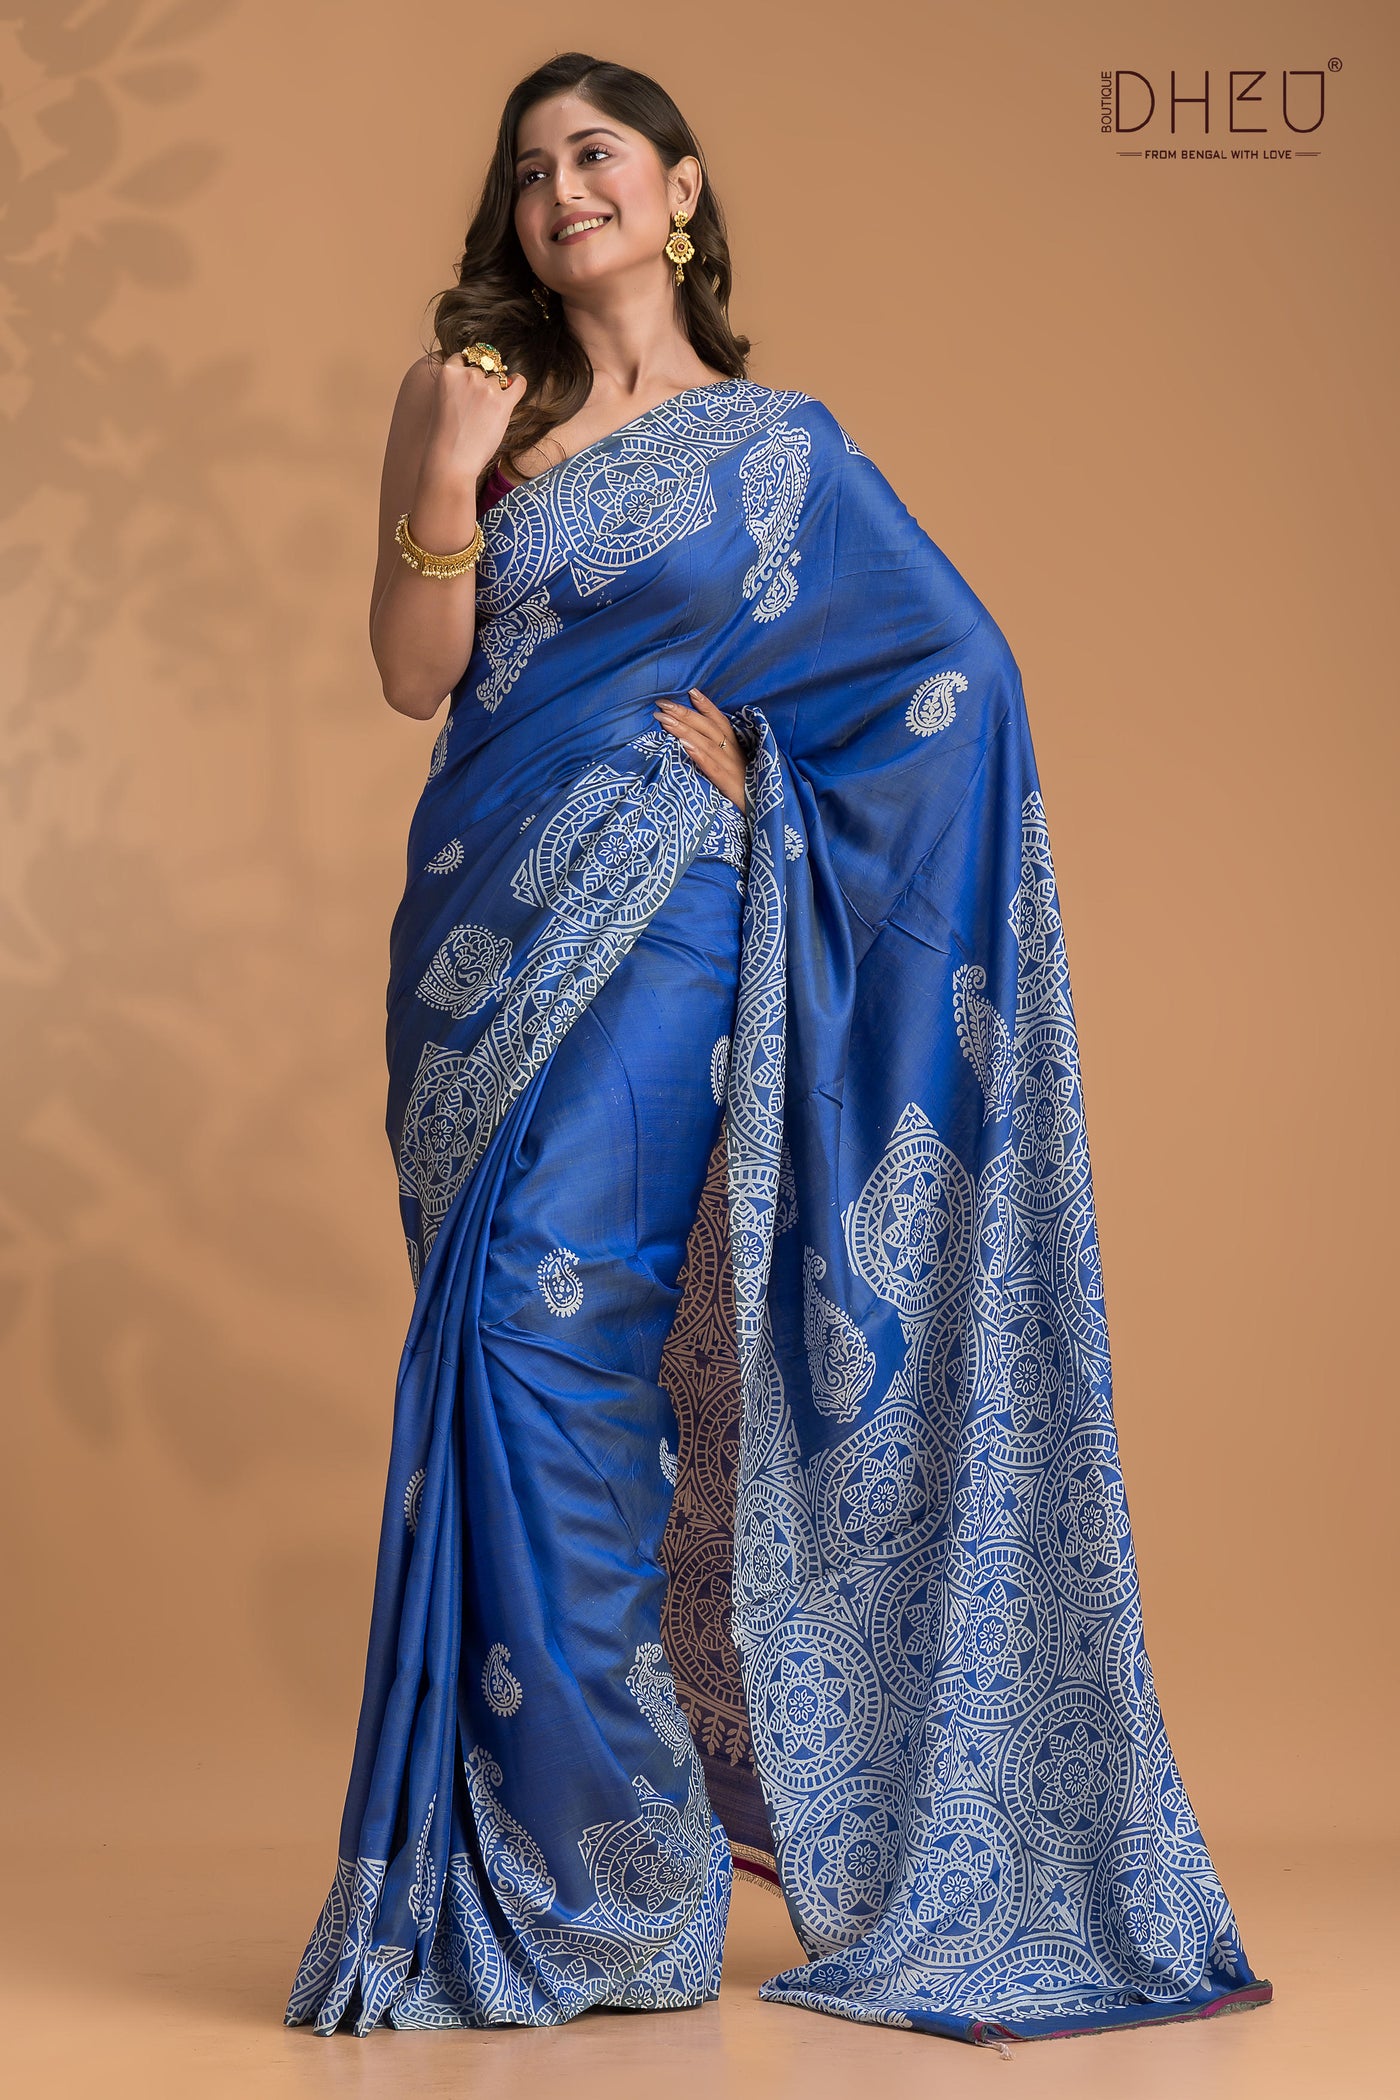 Designer pure bishnupuri silk saree at lowest cost only at dheu.in